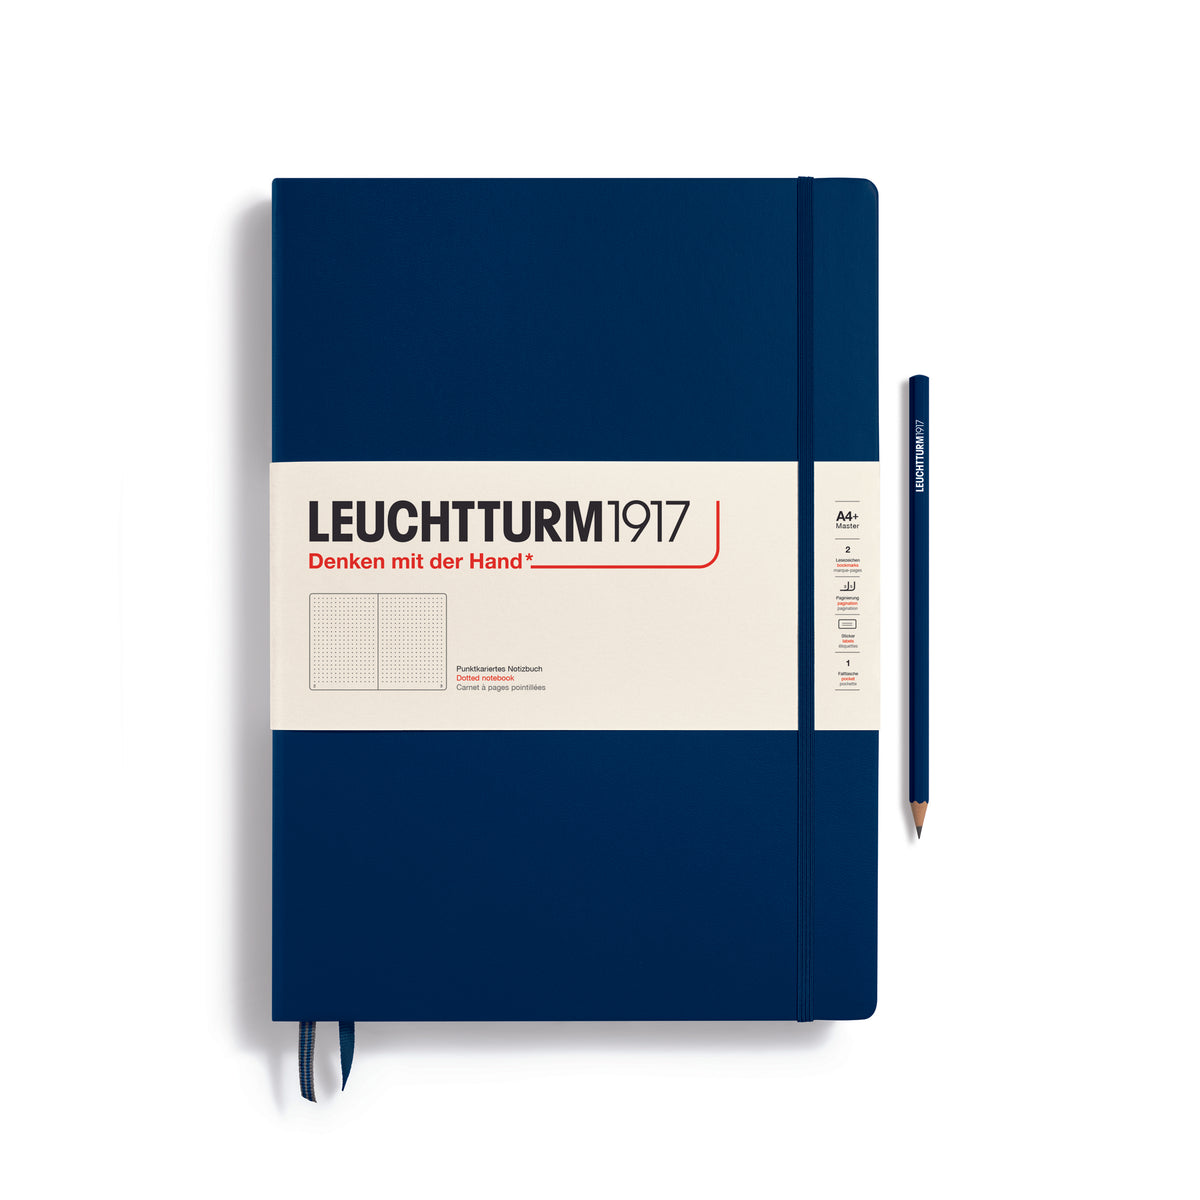 A large dark blue notebook with a white paper band around it with the logo of the brand Leuchtturm1917. Below this is an image of the page ruling inside - in this case, dotted. It has two page marker ribbons showing at the bottom near the binding and a matching colour elastic notebook closure holding it neatly together. A dark blue Leuchtturm pencil is shown at the side of the book.